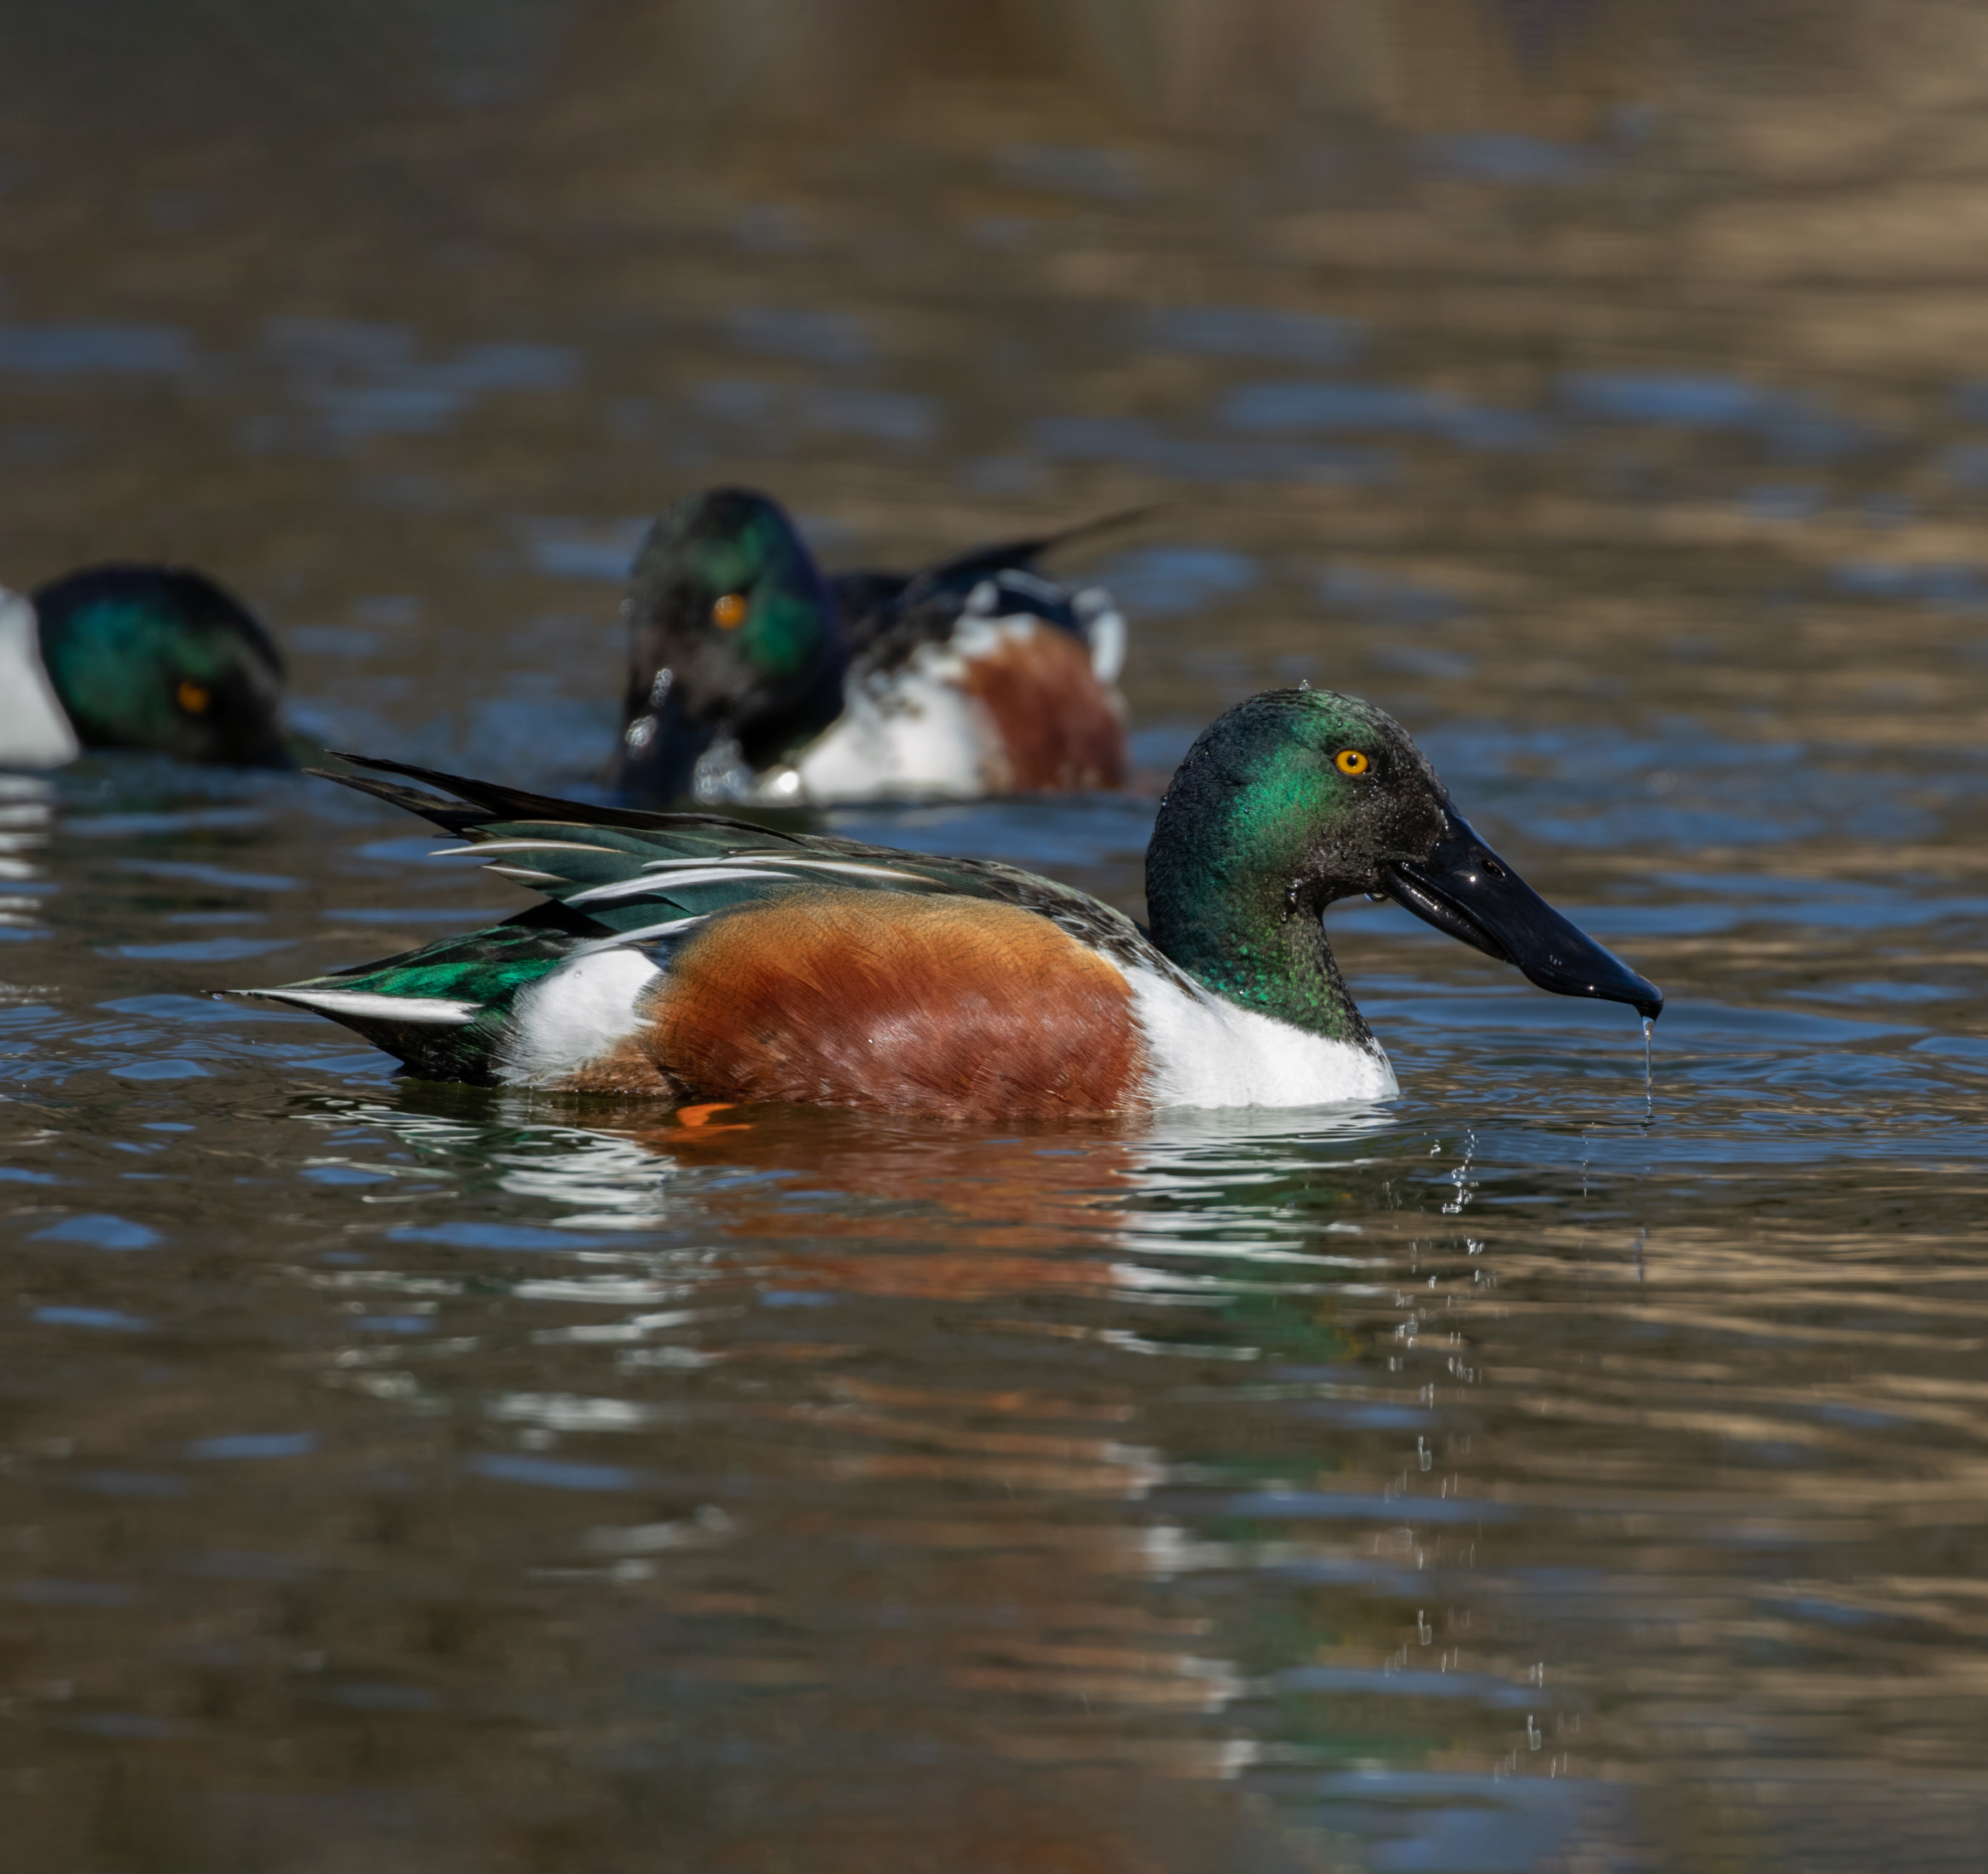 Northern Shovelers and a variety of other waterfowl may visit "Return-a-Gift Pond" in the wintertime. Photo: <a href="https://www.flickr.com/photos/144871758@N05/" target="_blank">Ryan F. Mandelbaum</a>